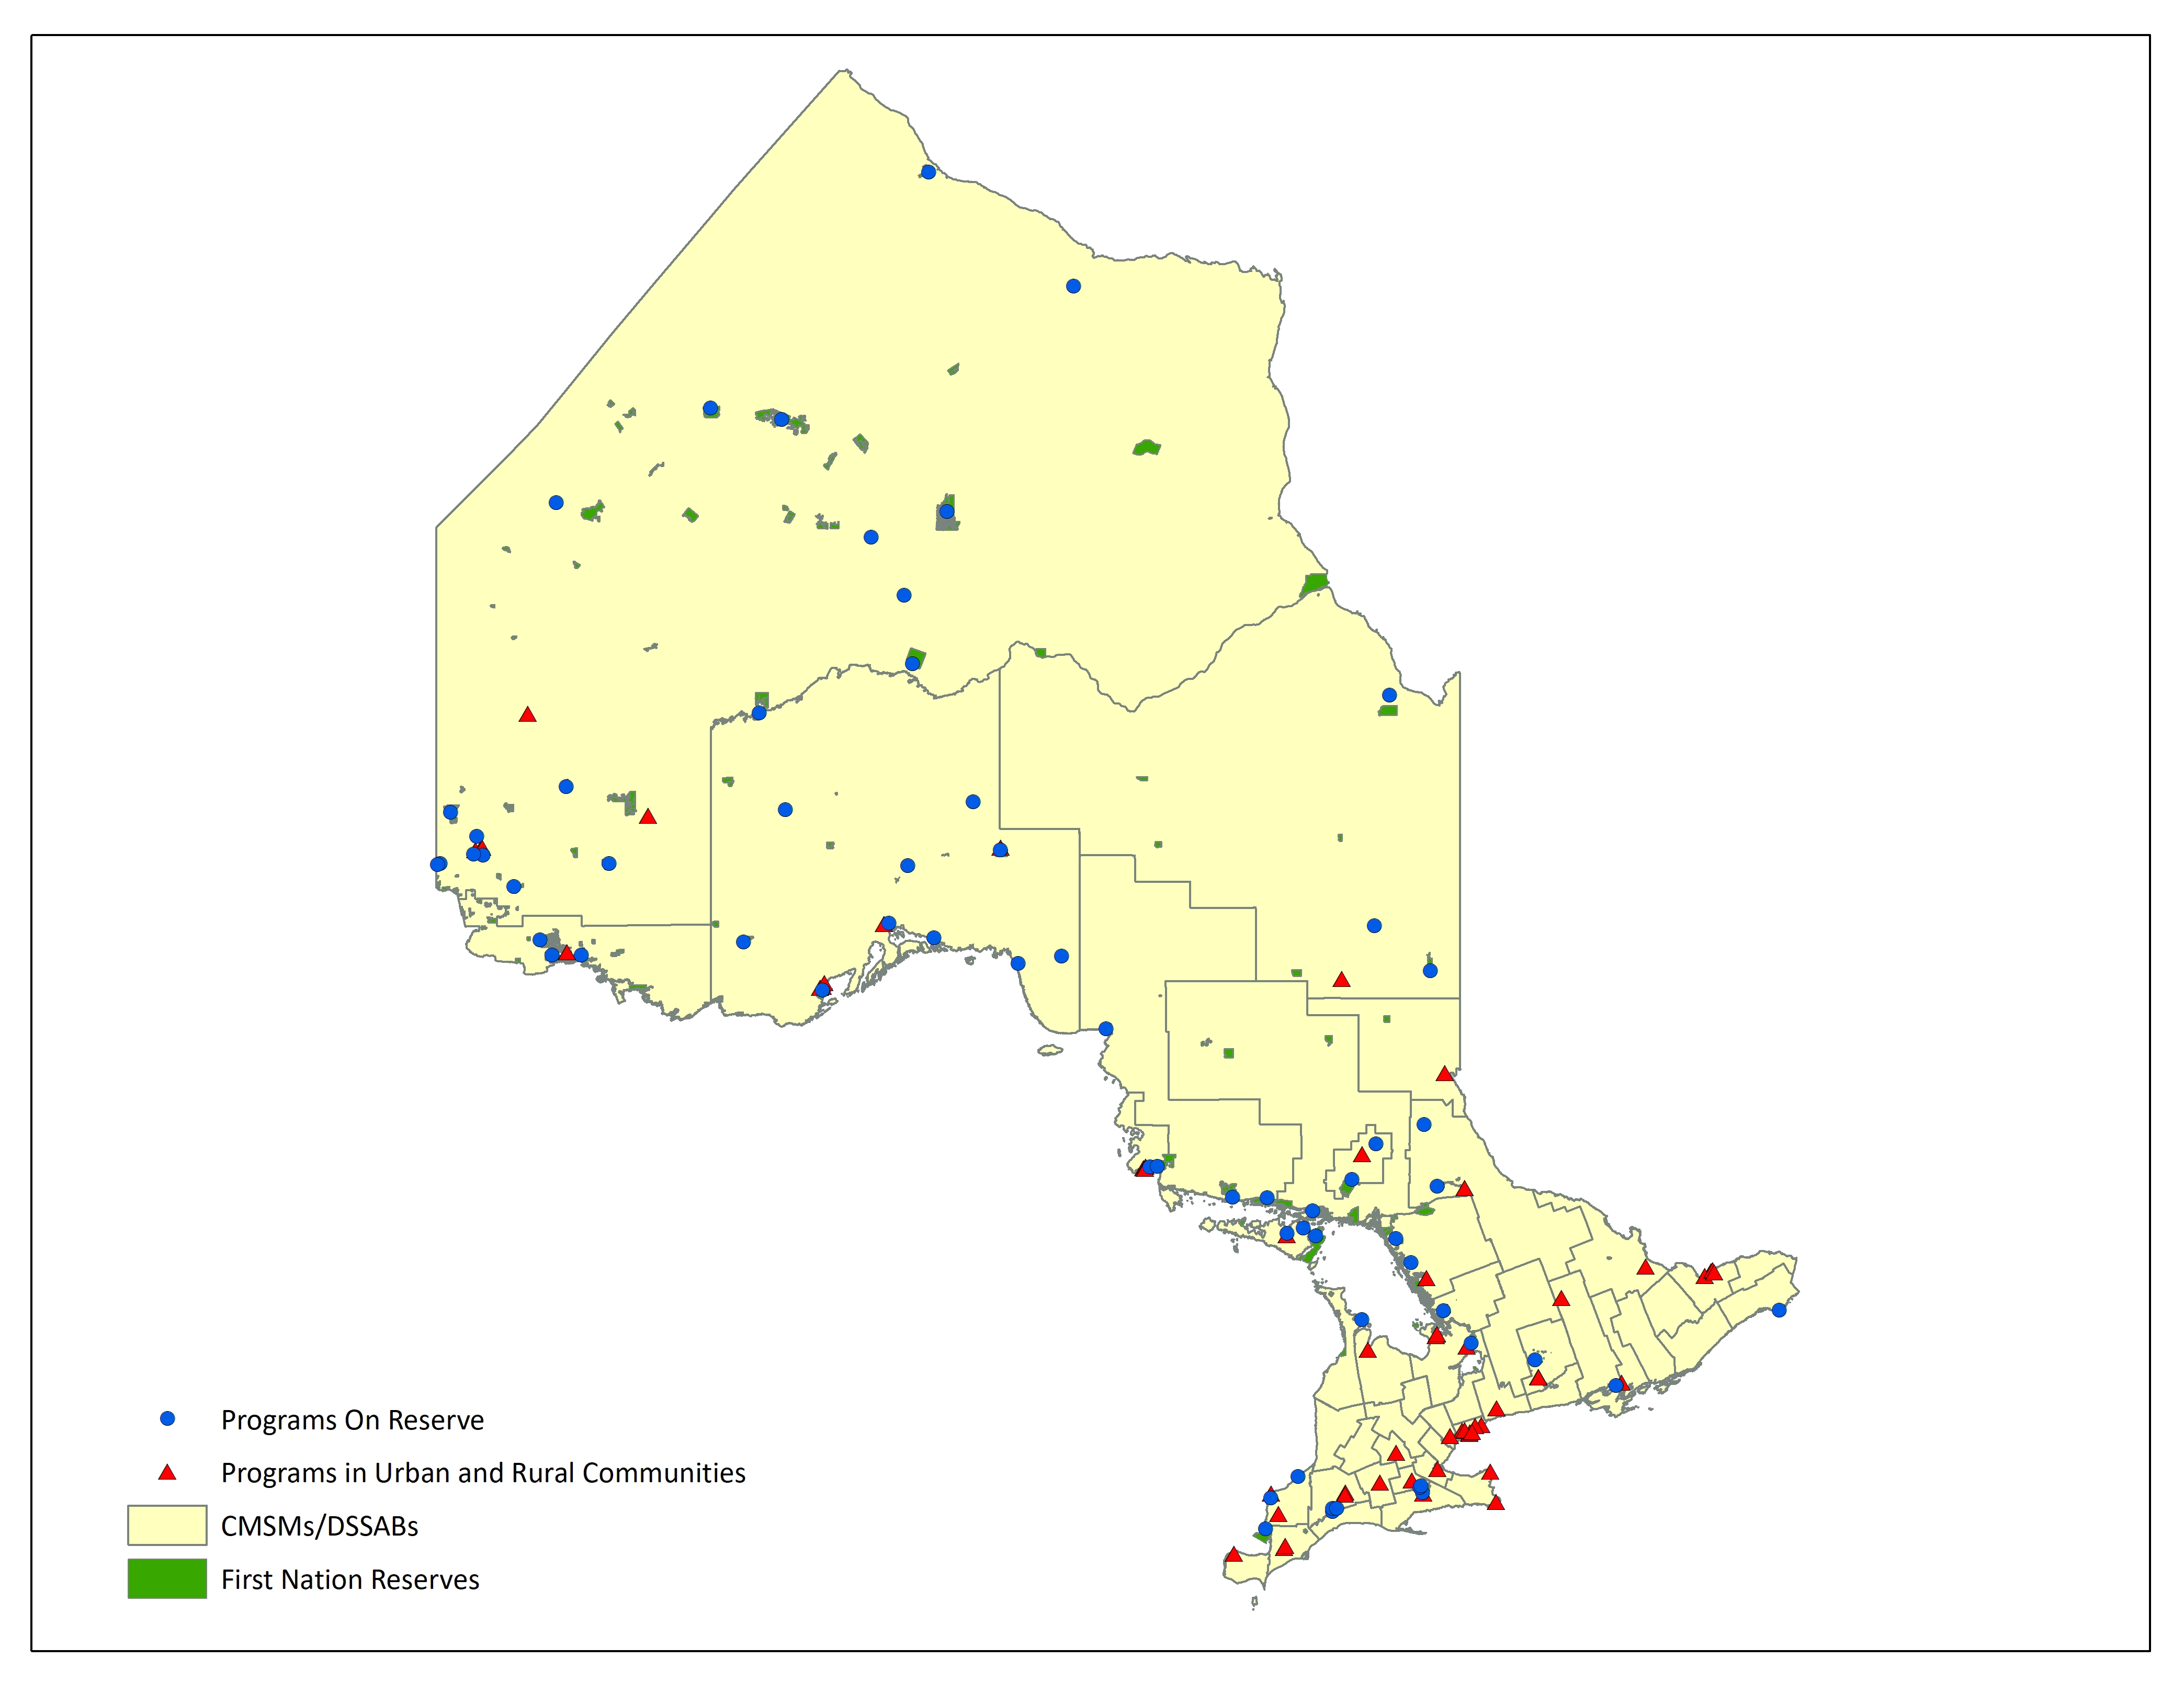 Map of Ontario showing the locations of Indigenous-led child care and child and family programs on reserve and in urban and rural communities.